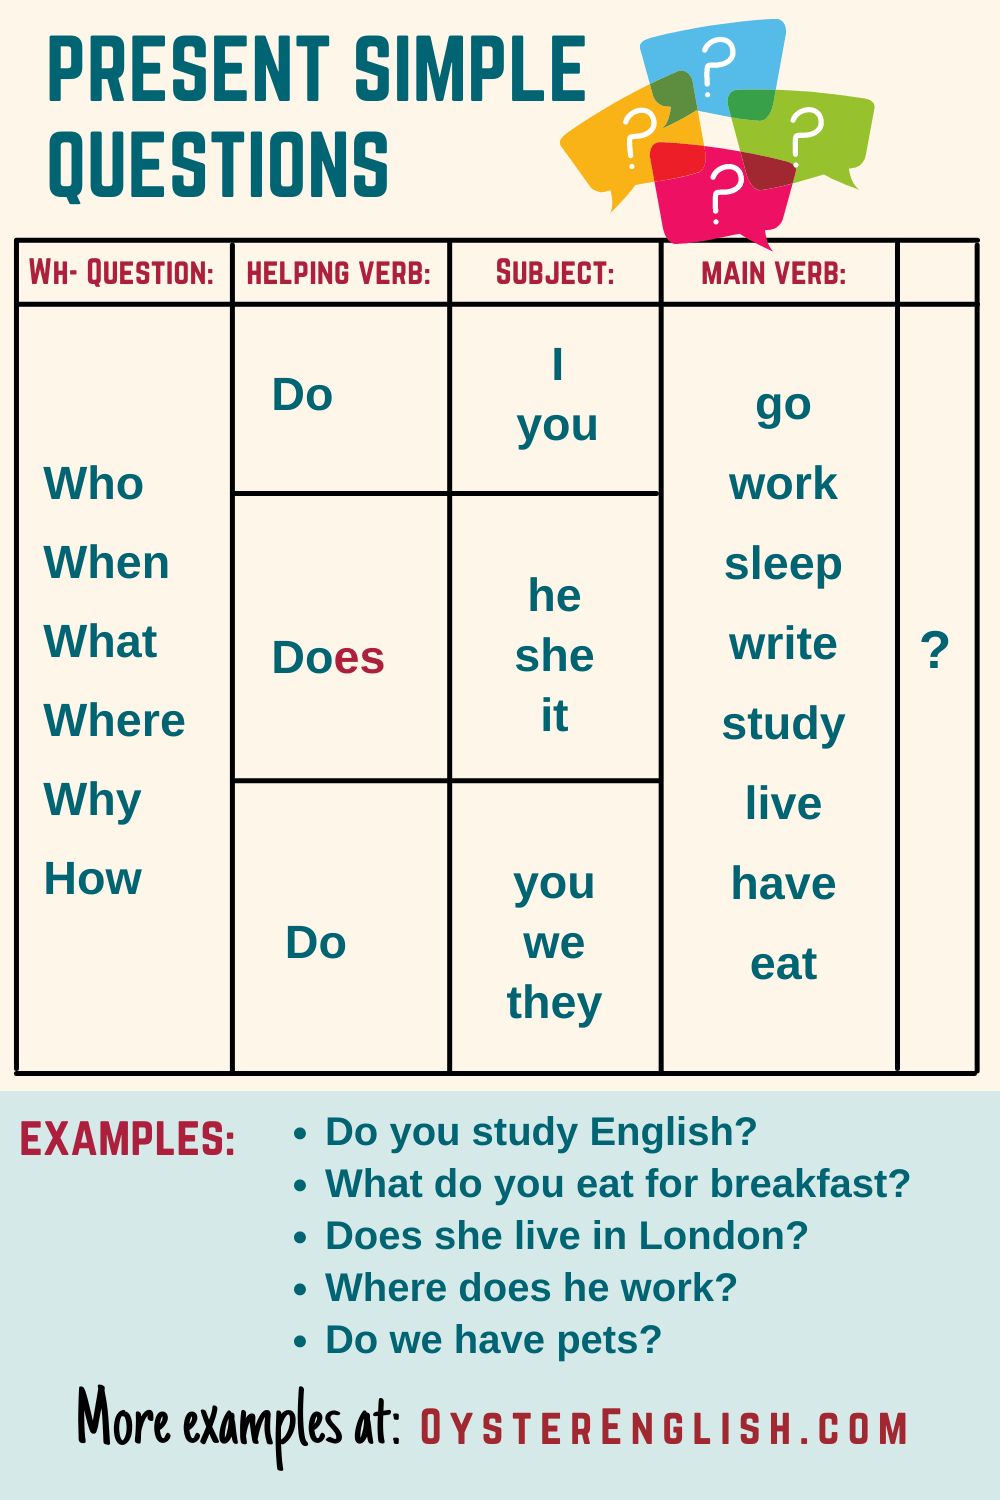 wh-questions-simple-present-tense-exercise-exercise-poster-gambaran